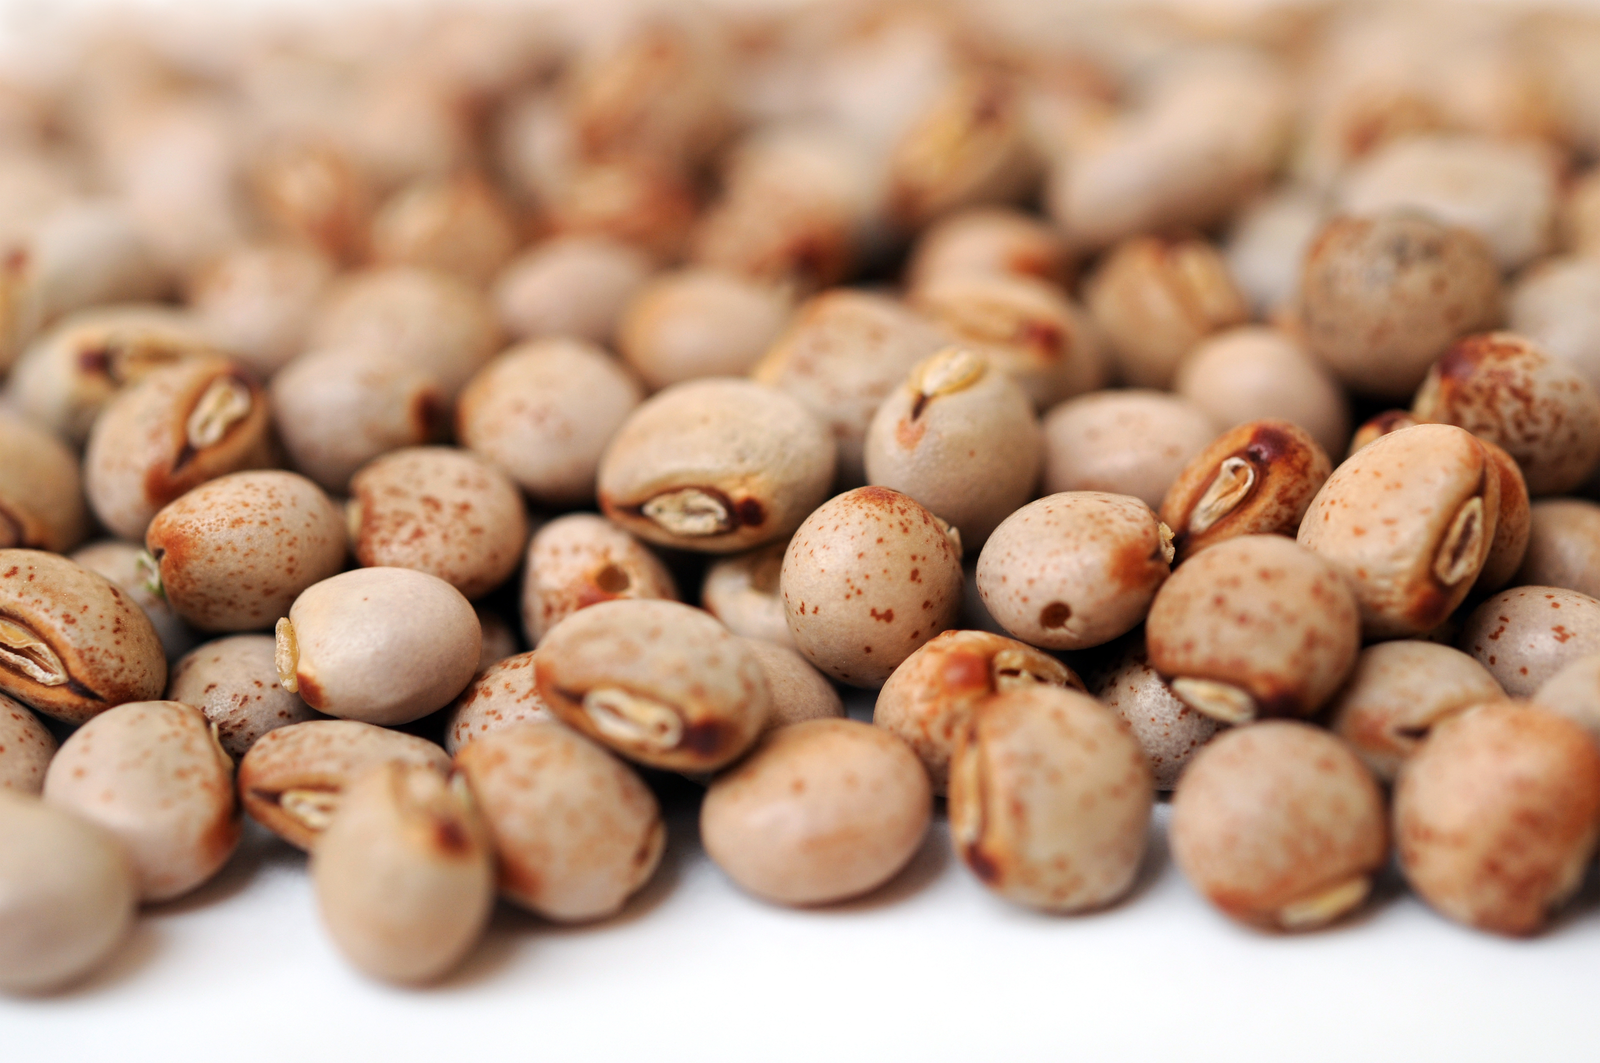 Pigeon peas are one alternative protein source being considered for poultry diets. [Photo: Shutterstock, An Nguyen]